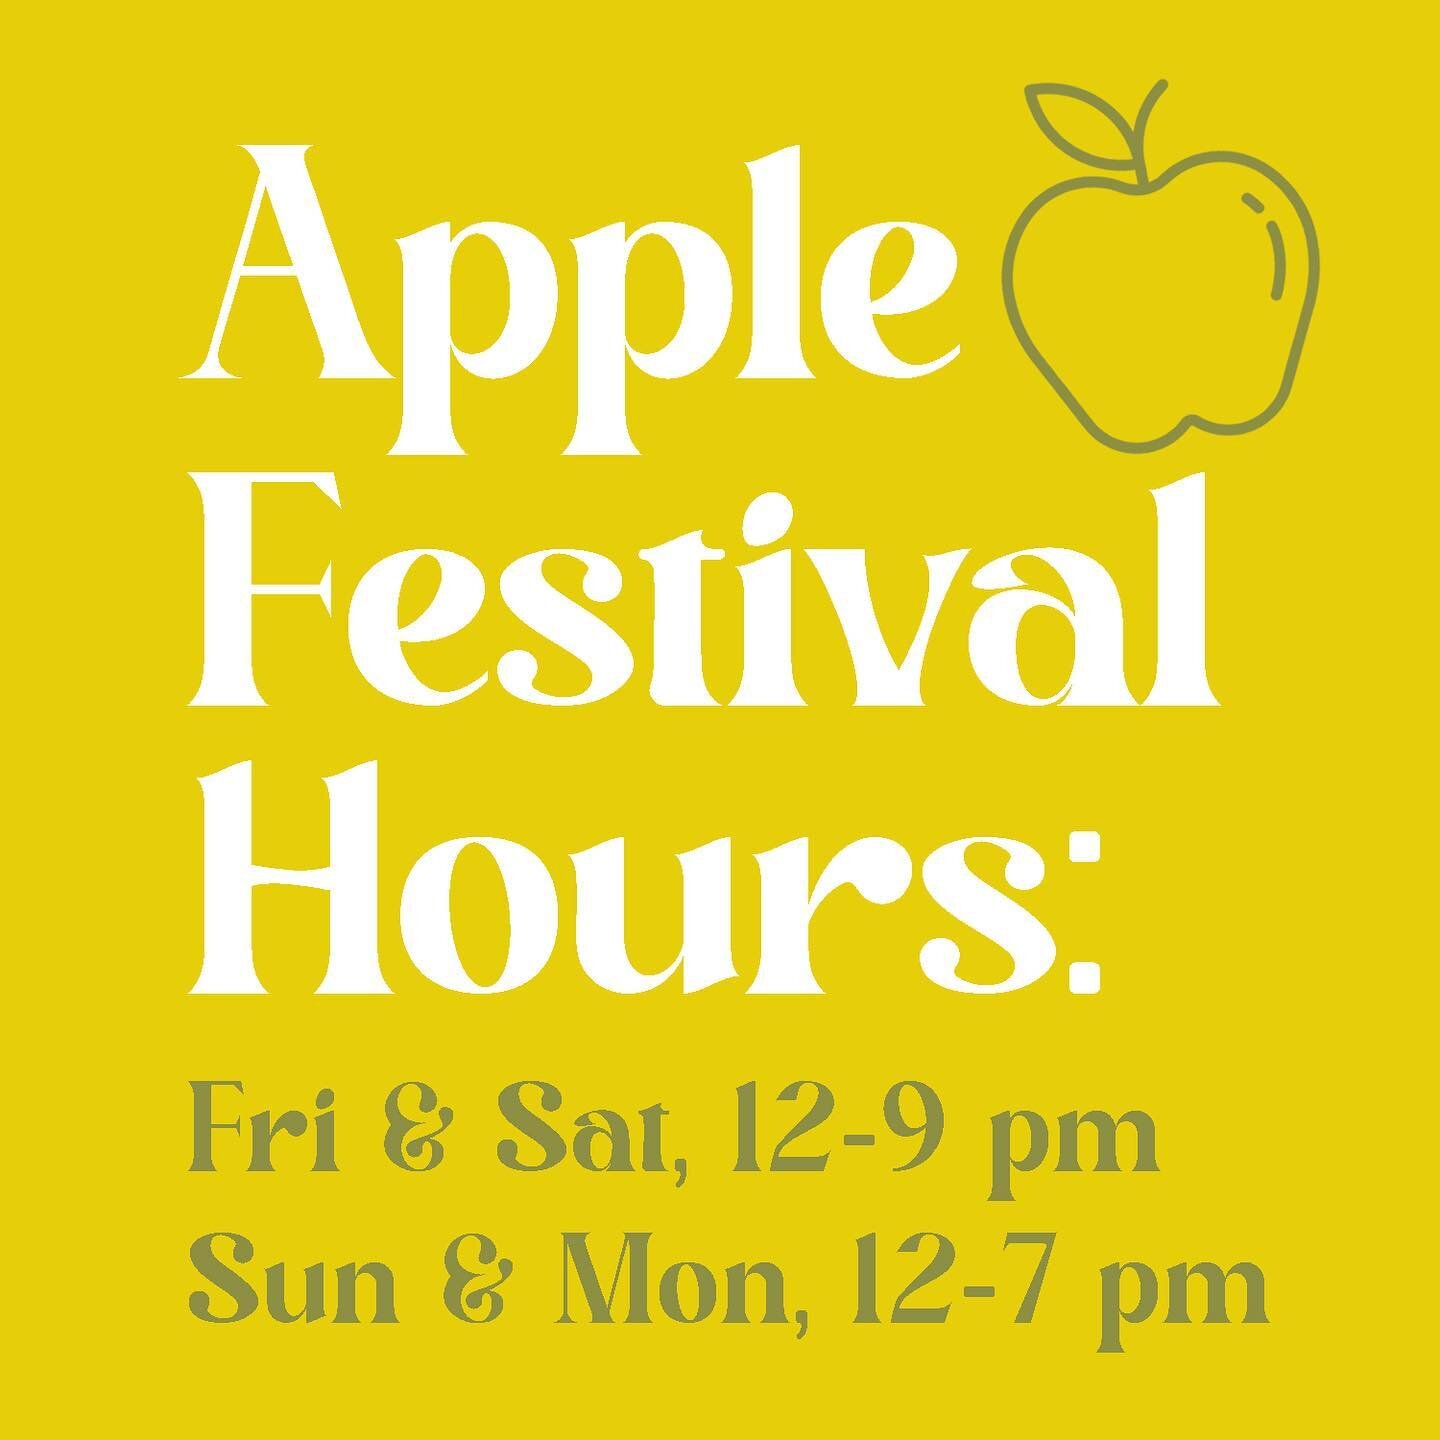 🍎 Peep our changed hours for the HVL Apple Festival 👀 as well as some upcoming days we will be closed! 

#hendersonville #applefestival #haveagreatweekend